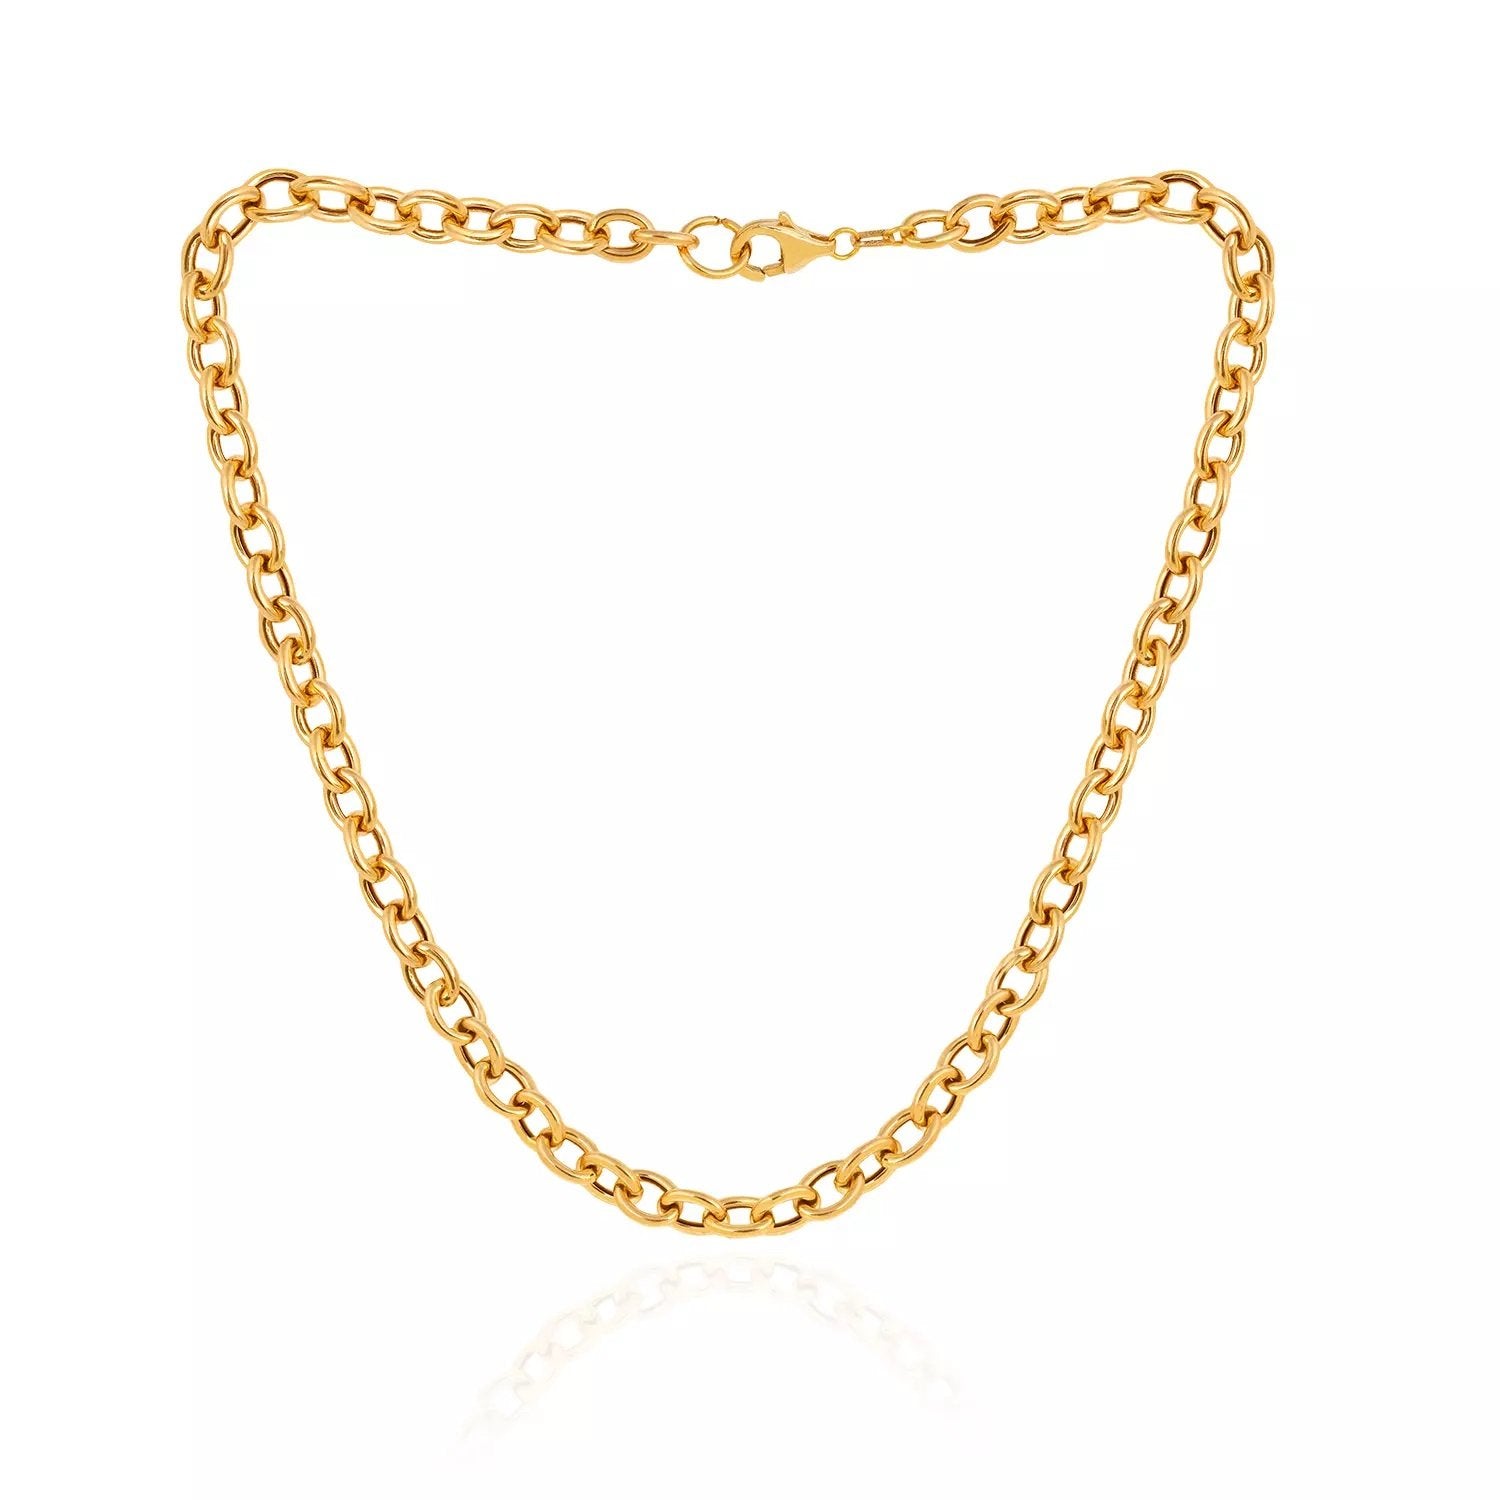 Yellow Gold Oval Links Chain. 18k 19.9gr 24"